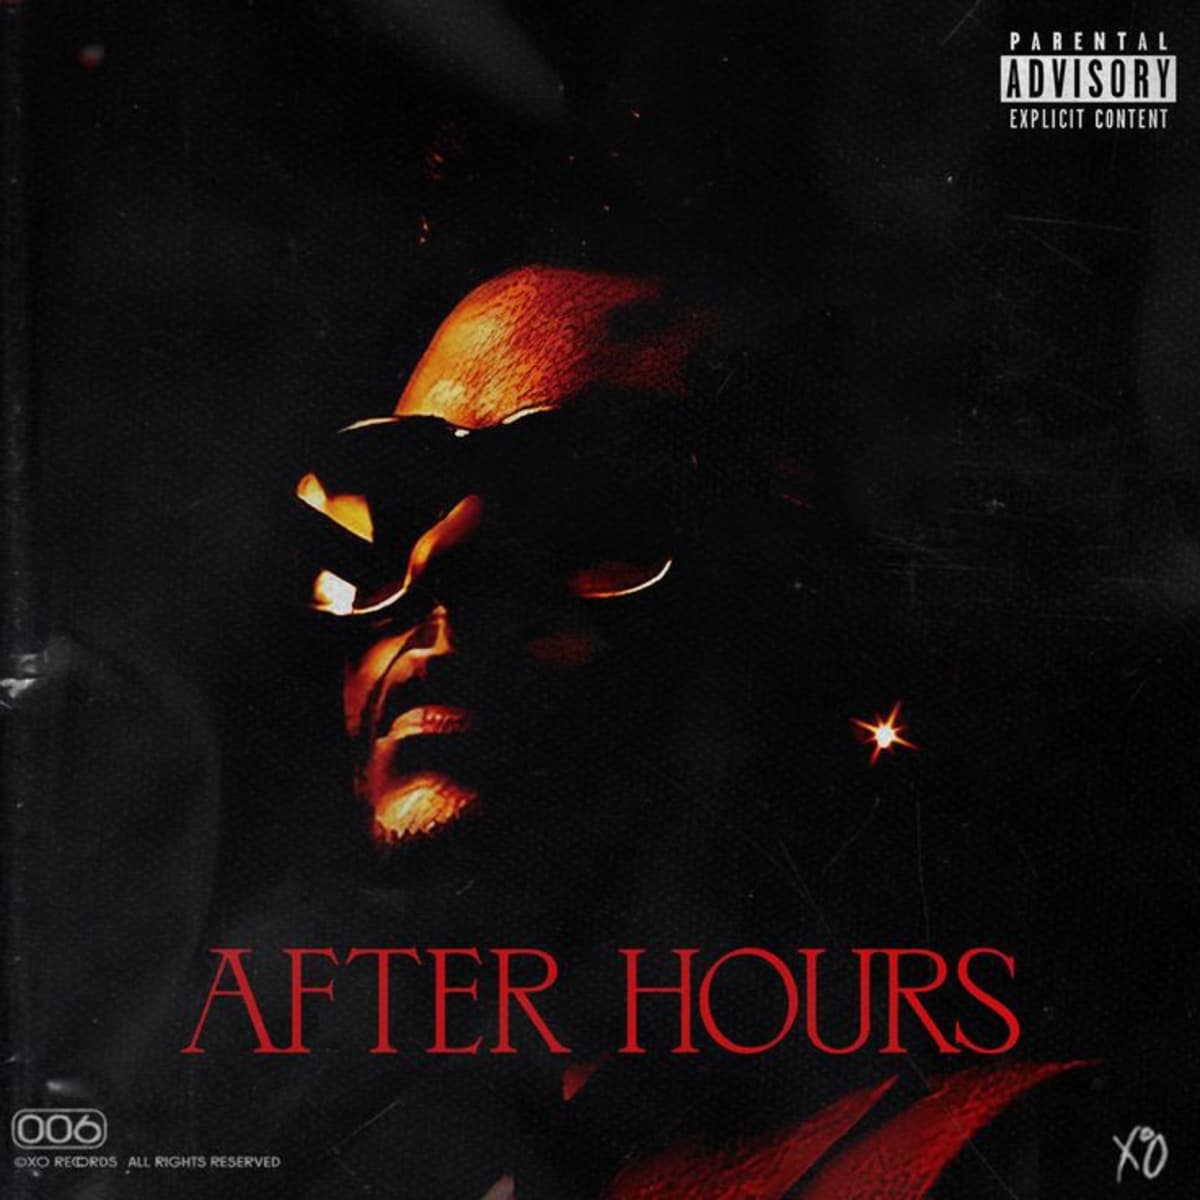 The Weeknd 'After Hours' Album Stream, Cover Art & Tracklist